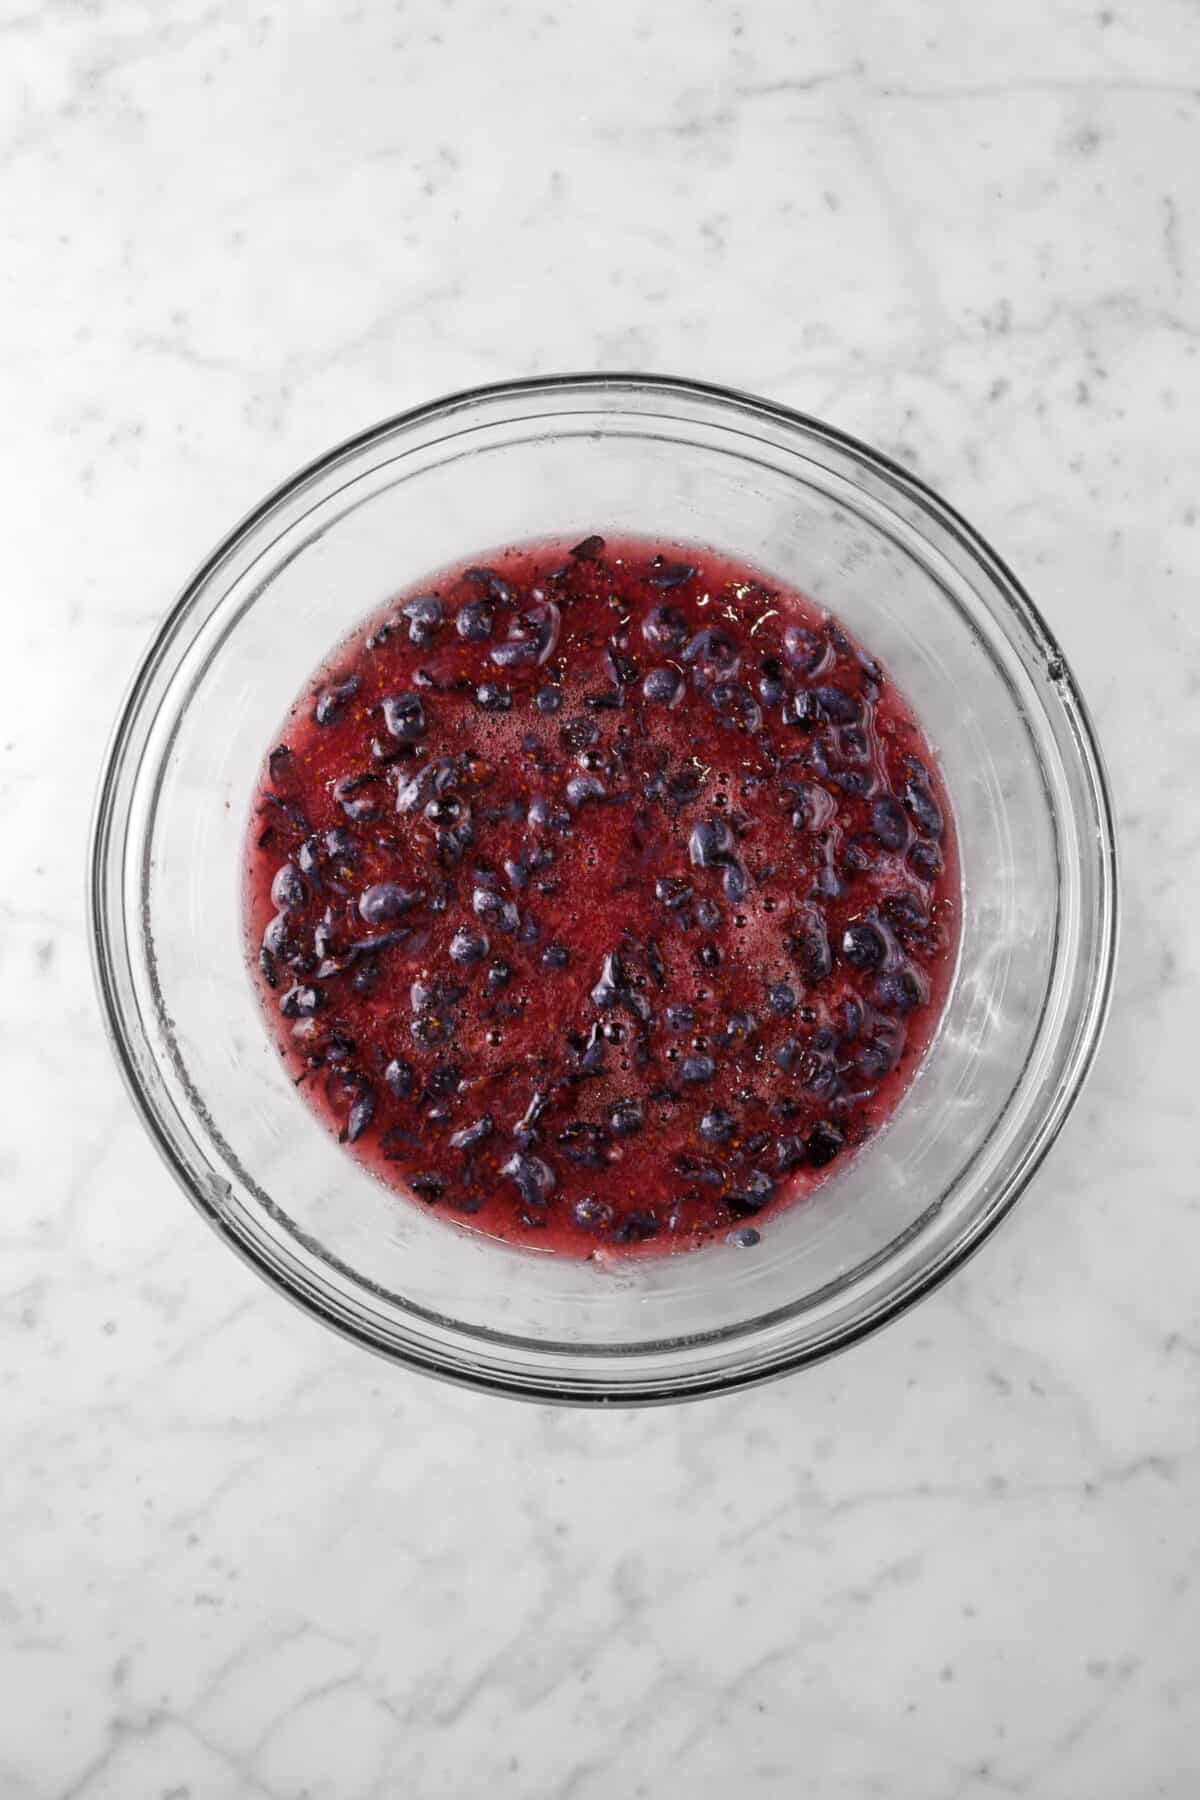 sugar mixed into crushed blueberries